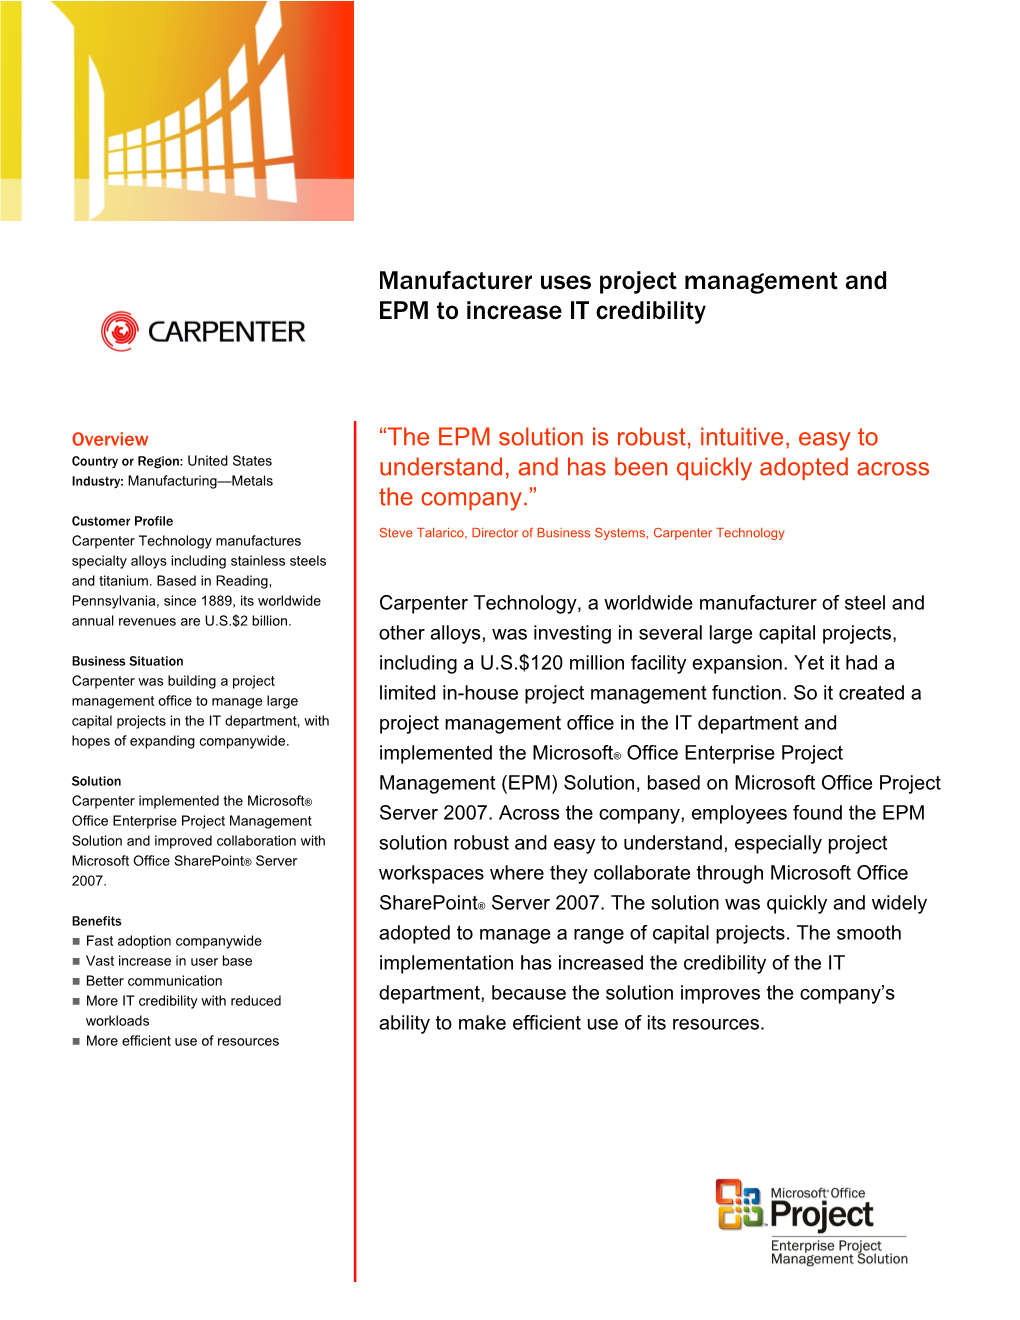 Manufacturer Uses Project Management and EPM to Increase IT Credibility